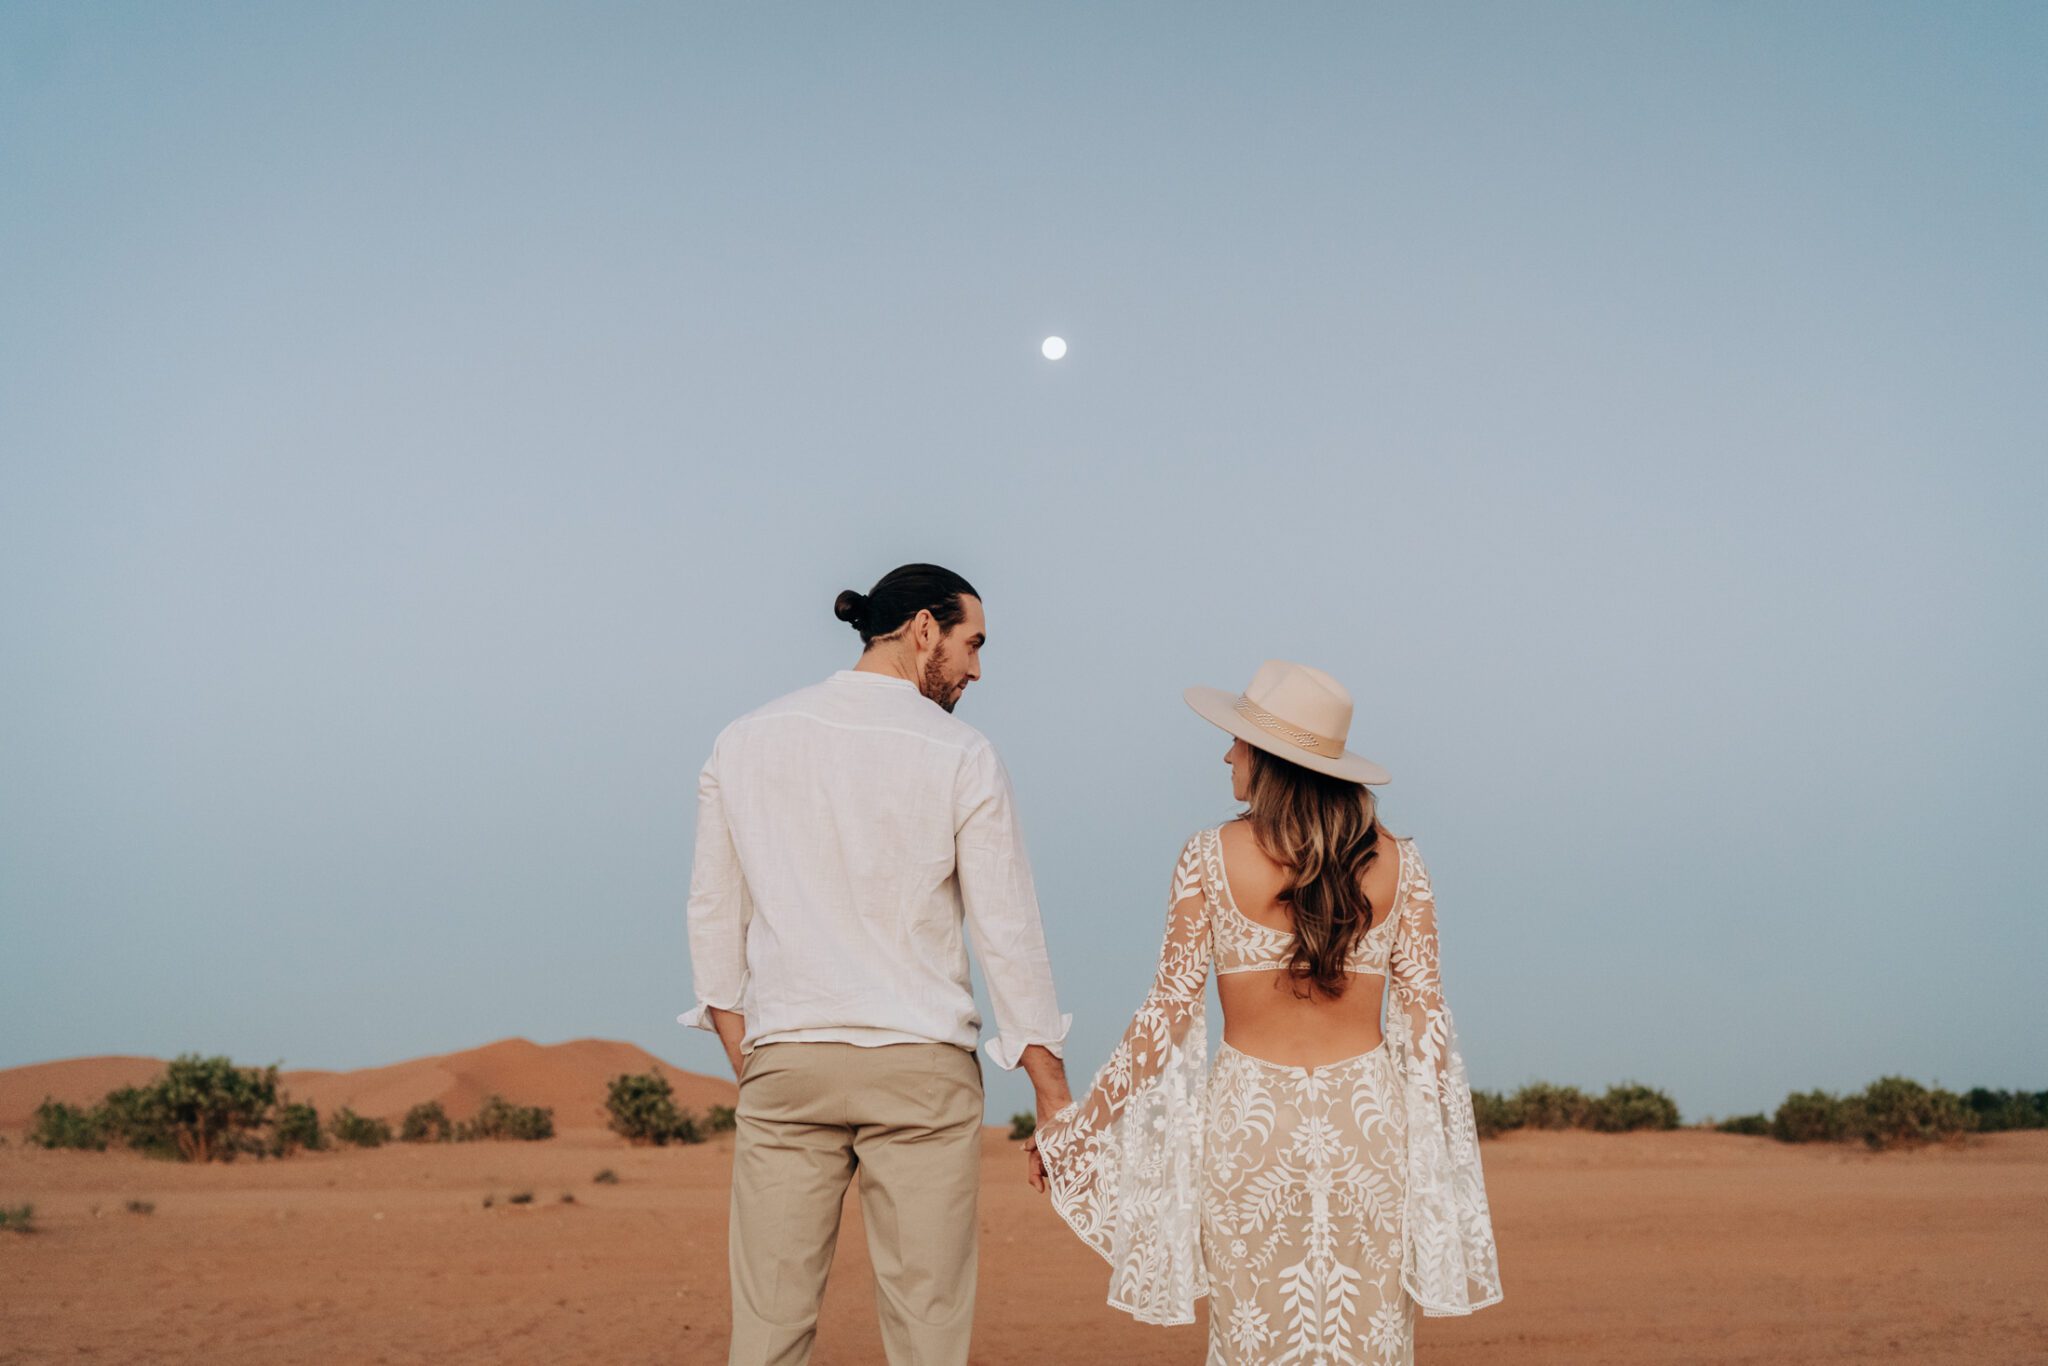 Couple holding hands in the desert with the moon in the background, captured by Seanna Leaf Photography.